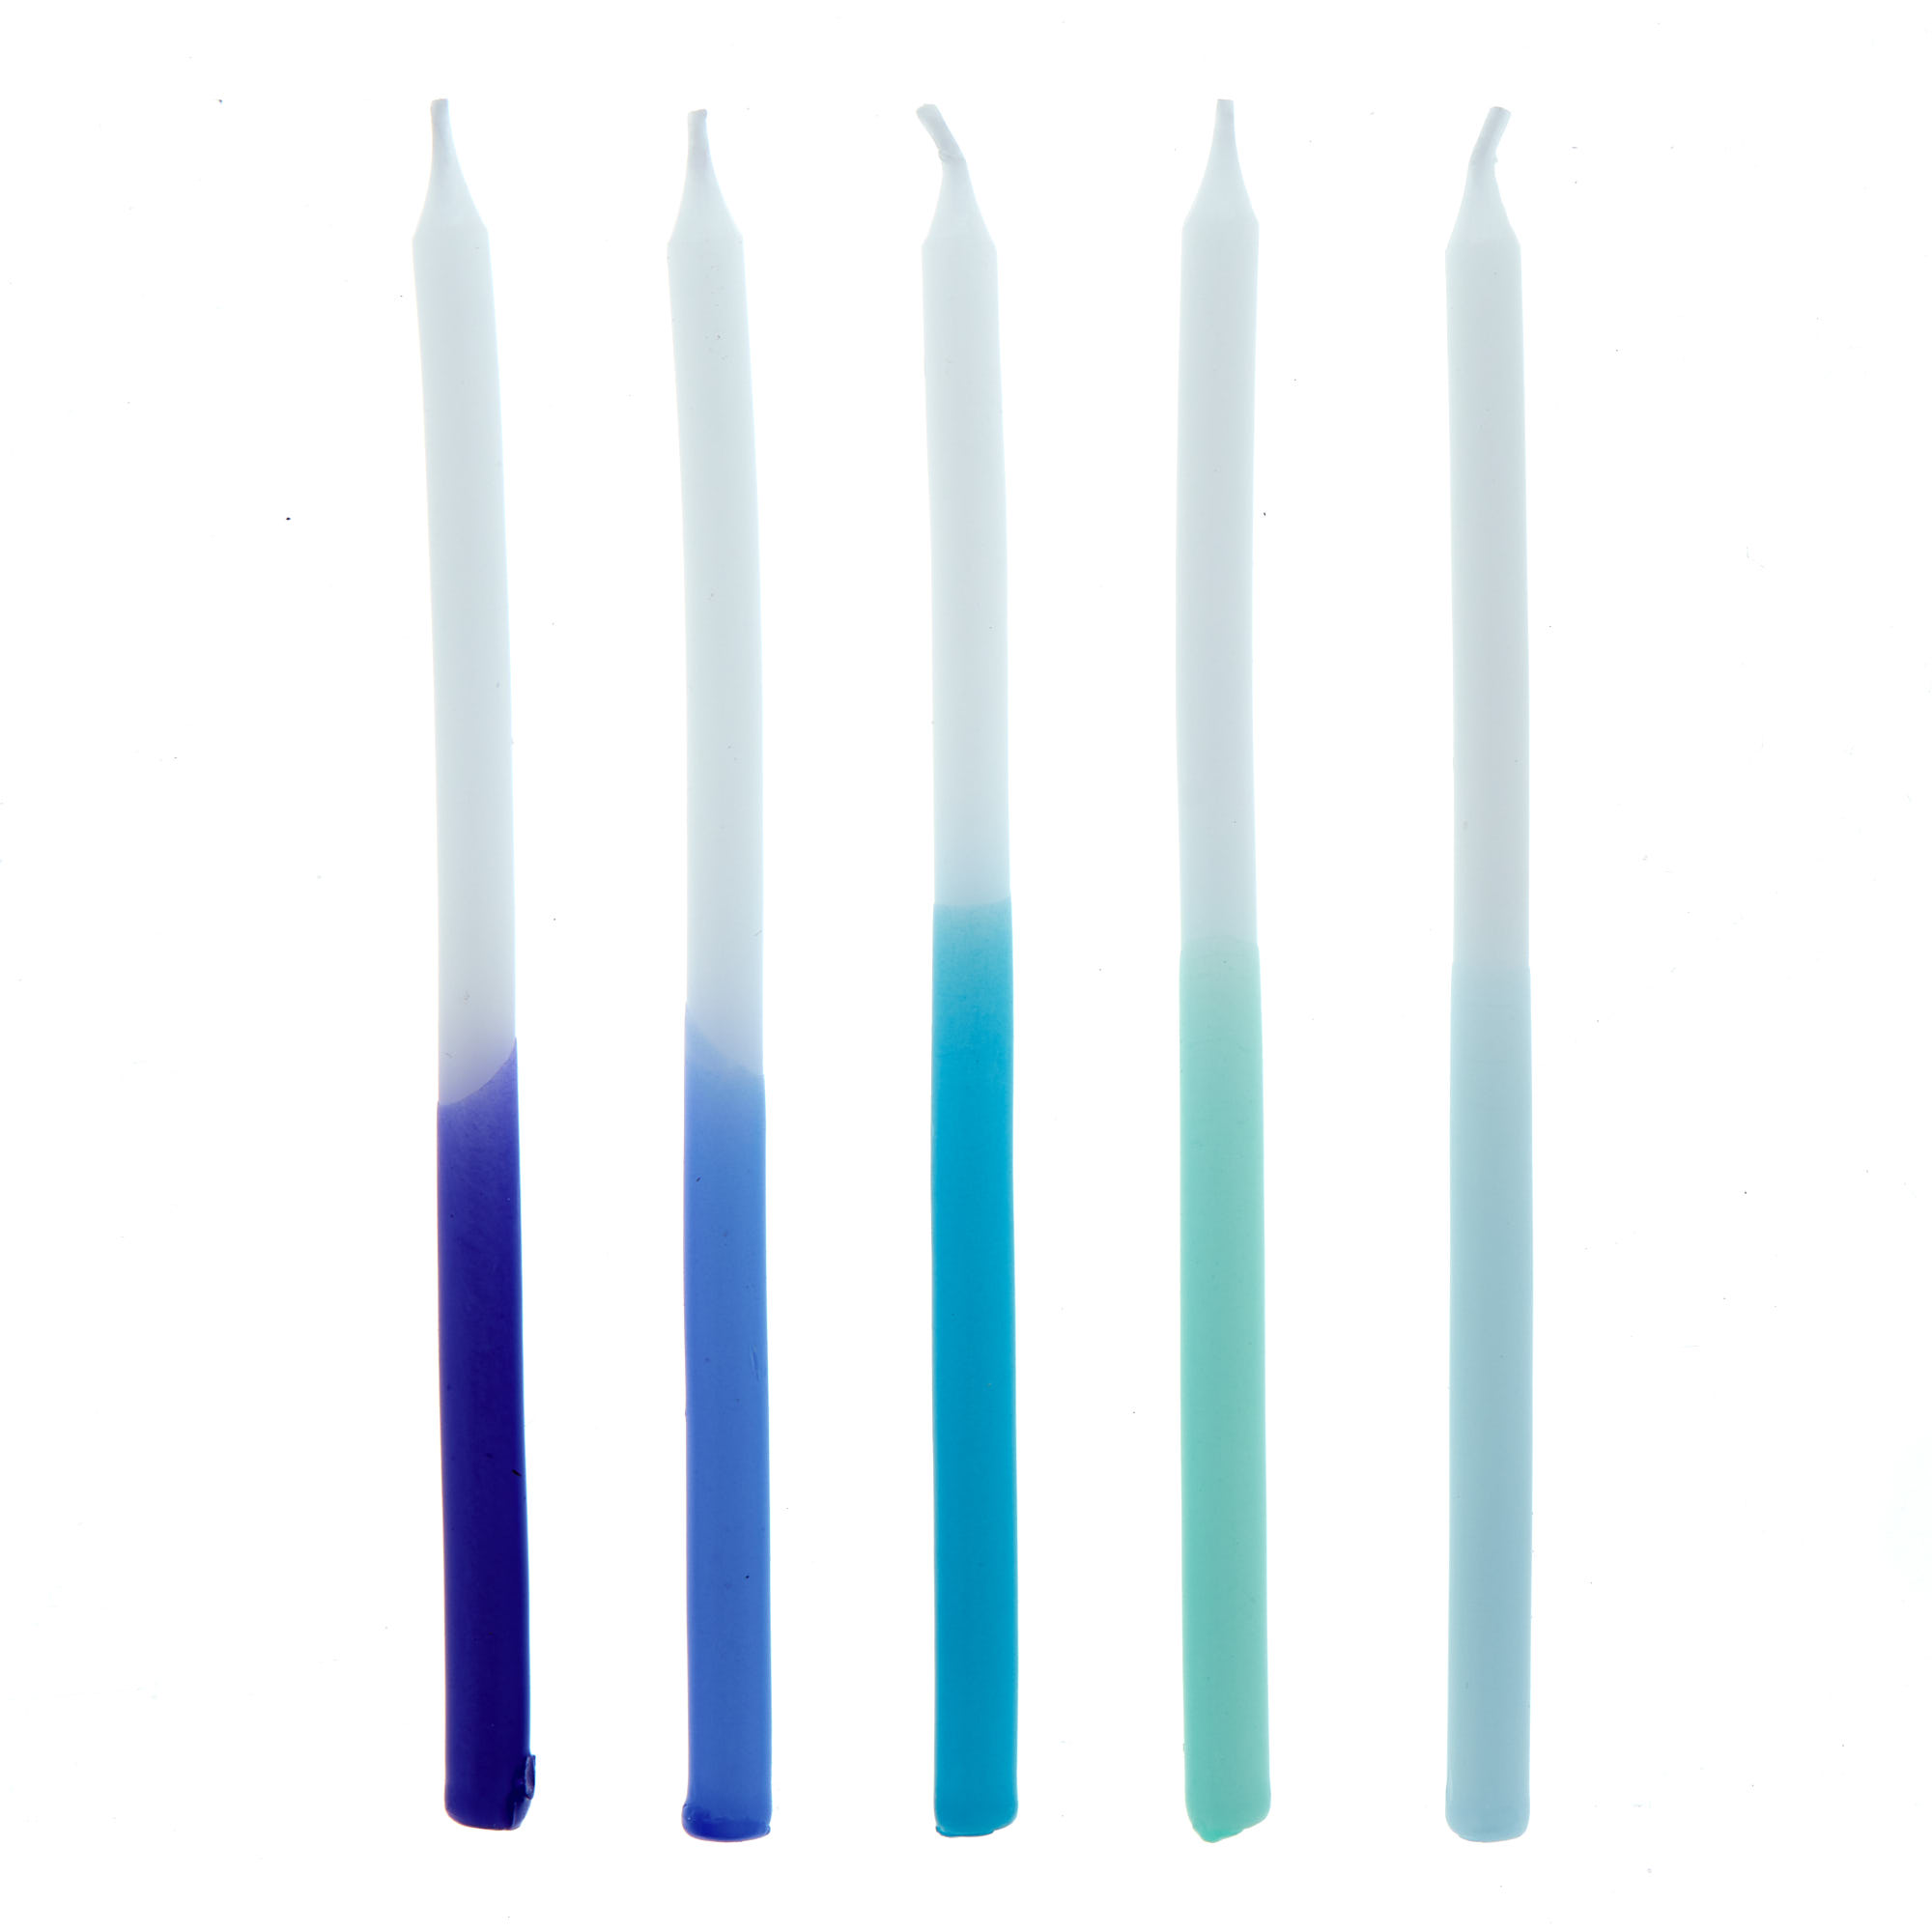 Tall Blue Gradient Cake Candles & Holders - Pack of 10 